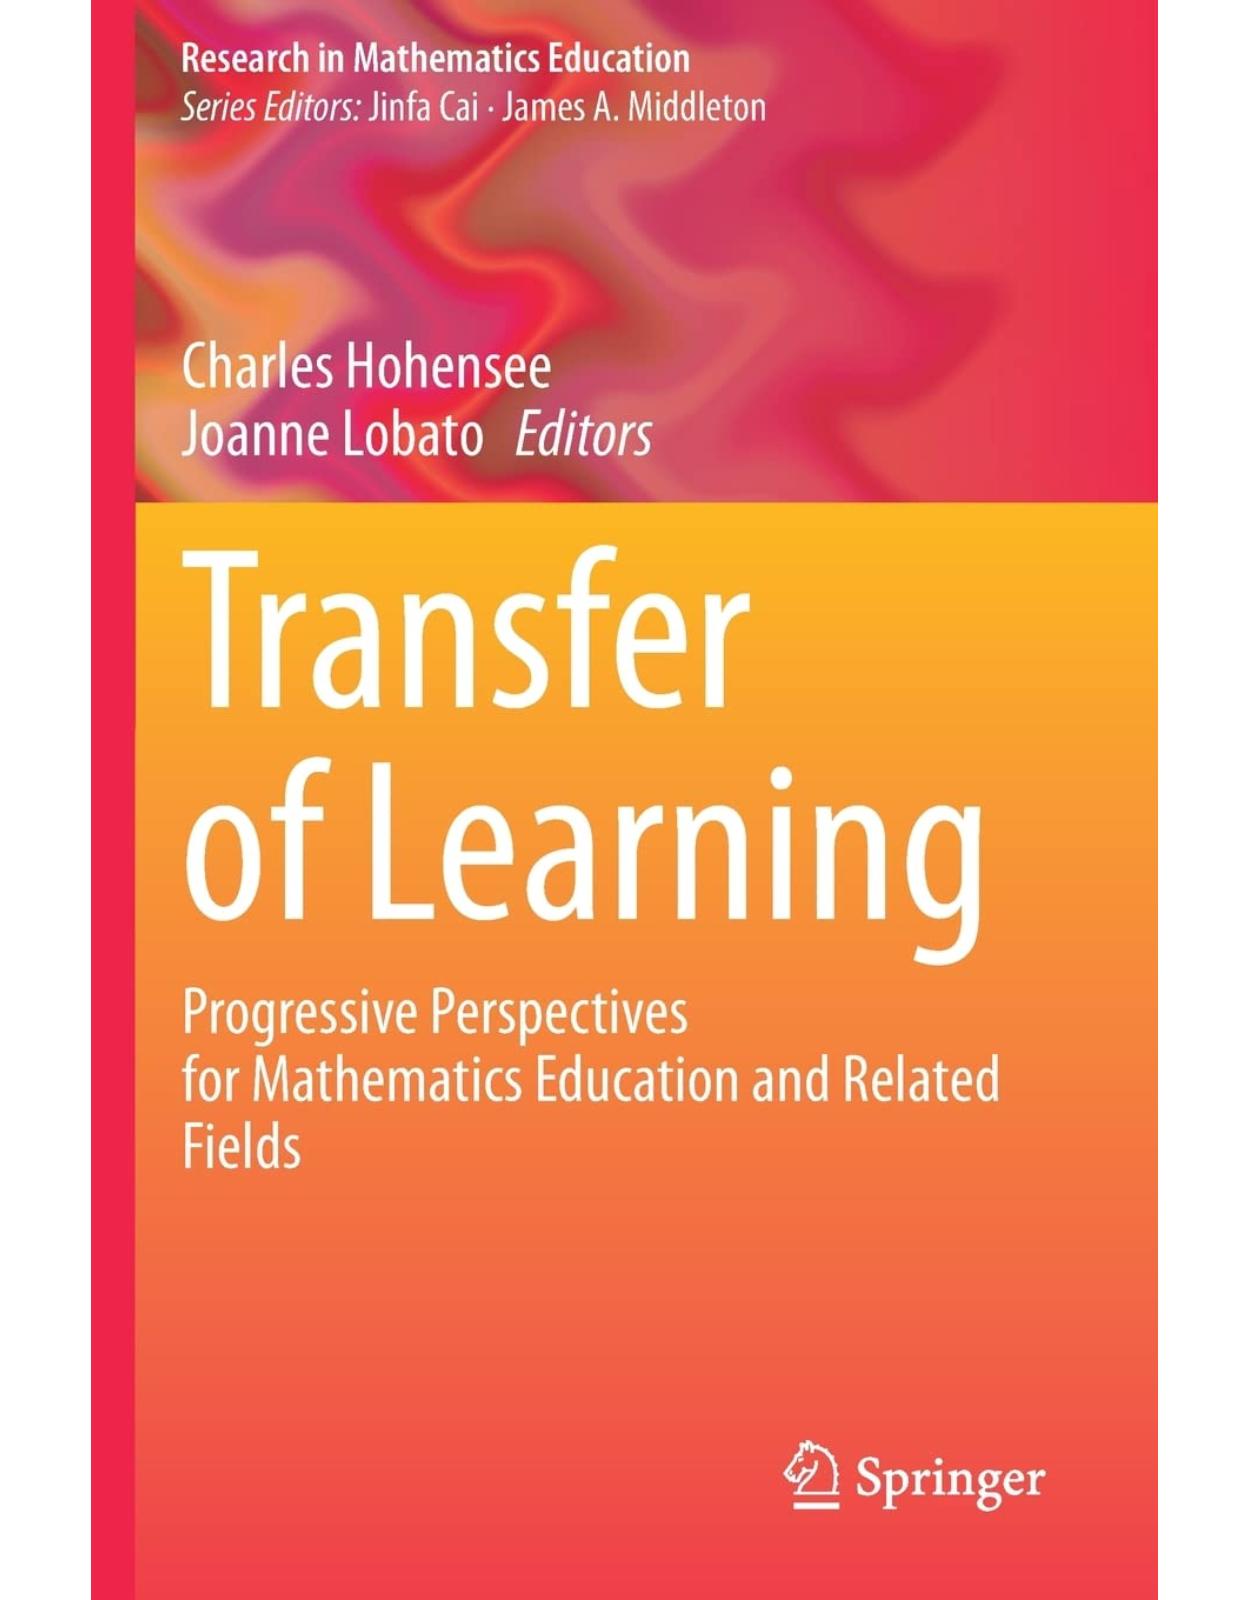 Transfer of Learning: Progressive Perspectives for Mathematics Education and Related Fields